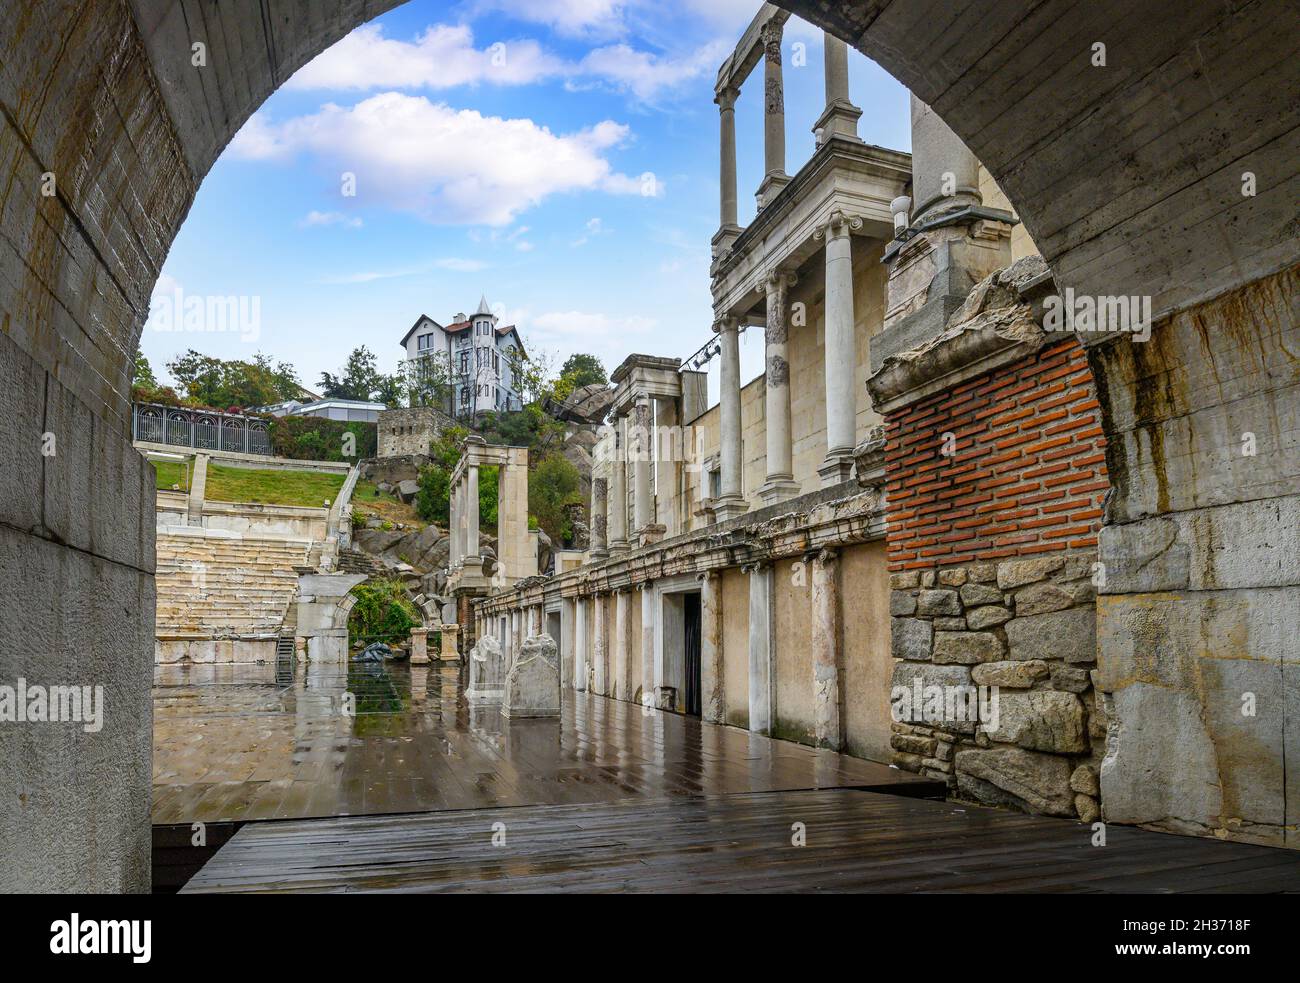 The Amphitheatre in Plovdiv, Bulgaria - European capital of culture 2019. Ancient roman theater a venue for dramatic and musical performances. Stock Photo